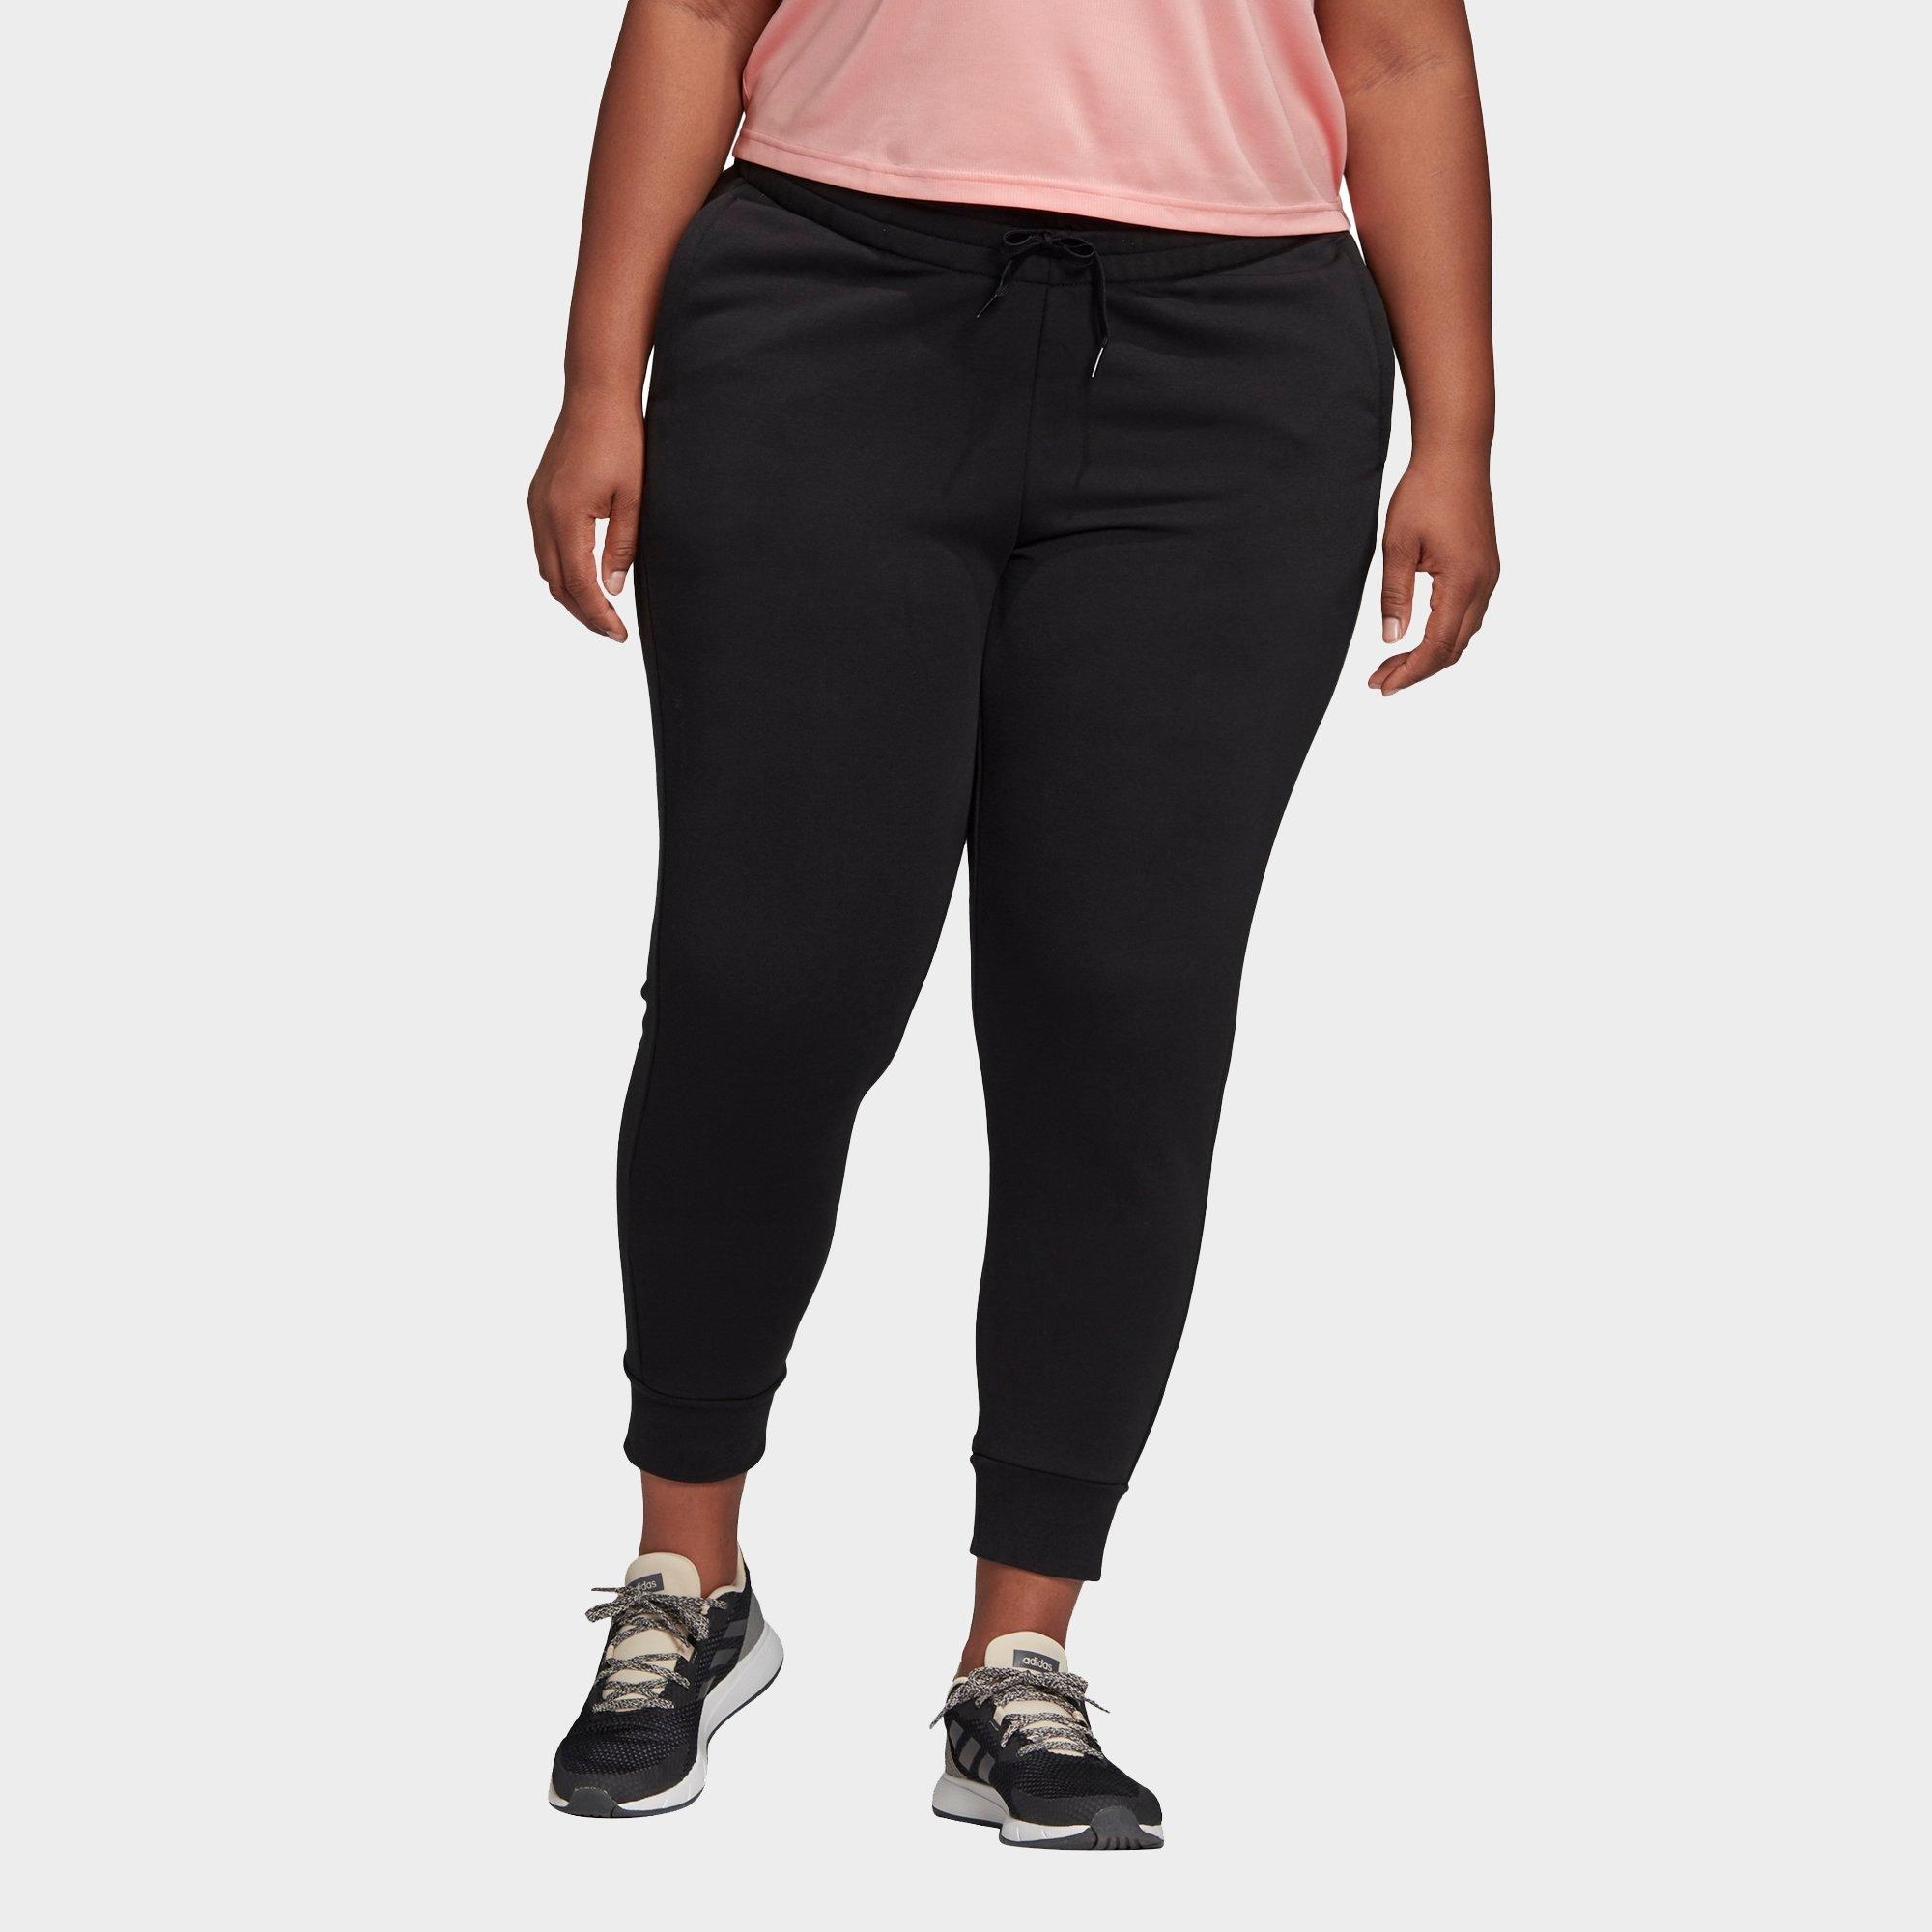 UPC 193105001635 product image for Adidas Women's Essentials Jogger Pants (Plus Size) in Black Size 4XL Cotton/Poly | upcitemdb.com